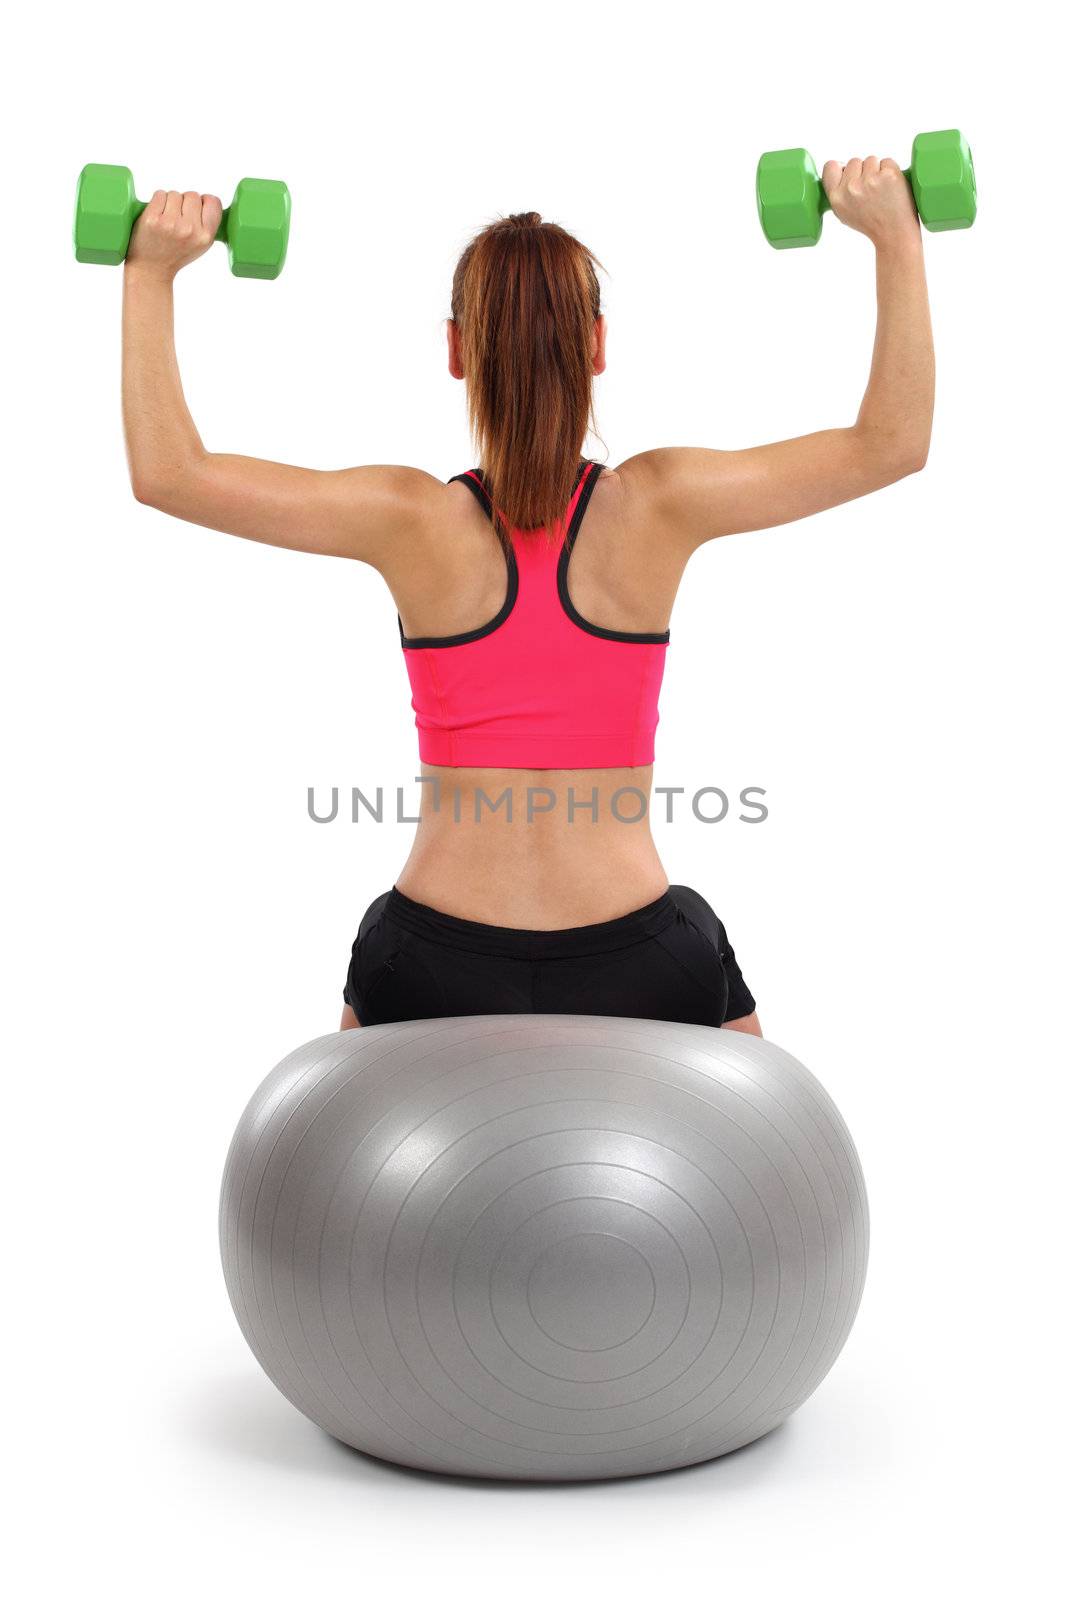 Photo of a female from behind doing dumbbell shoulder press while sitting on an exercise ball.